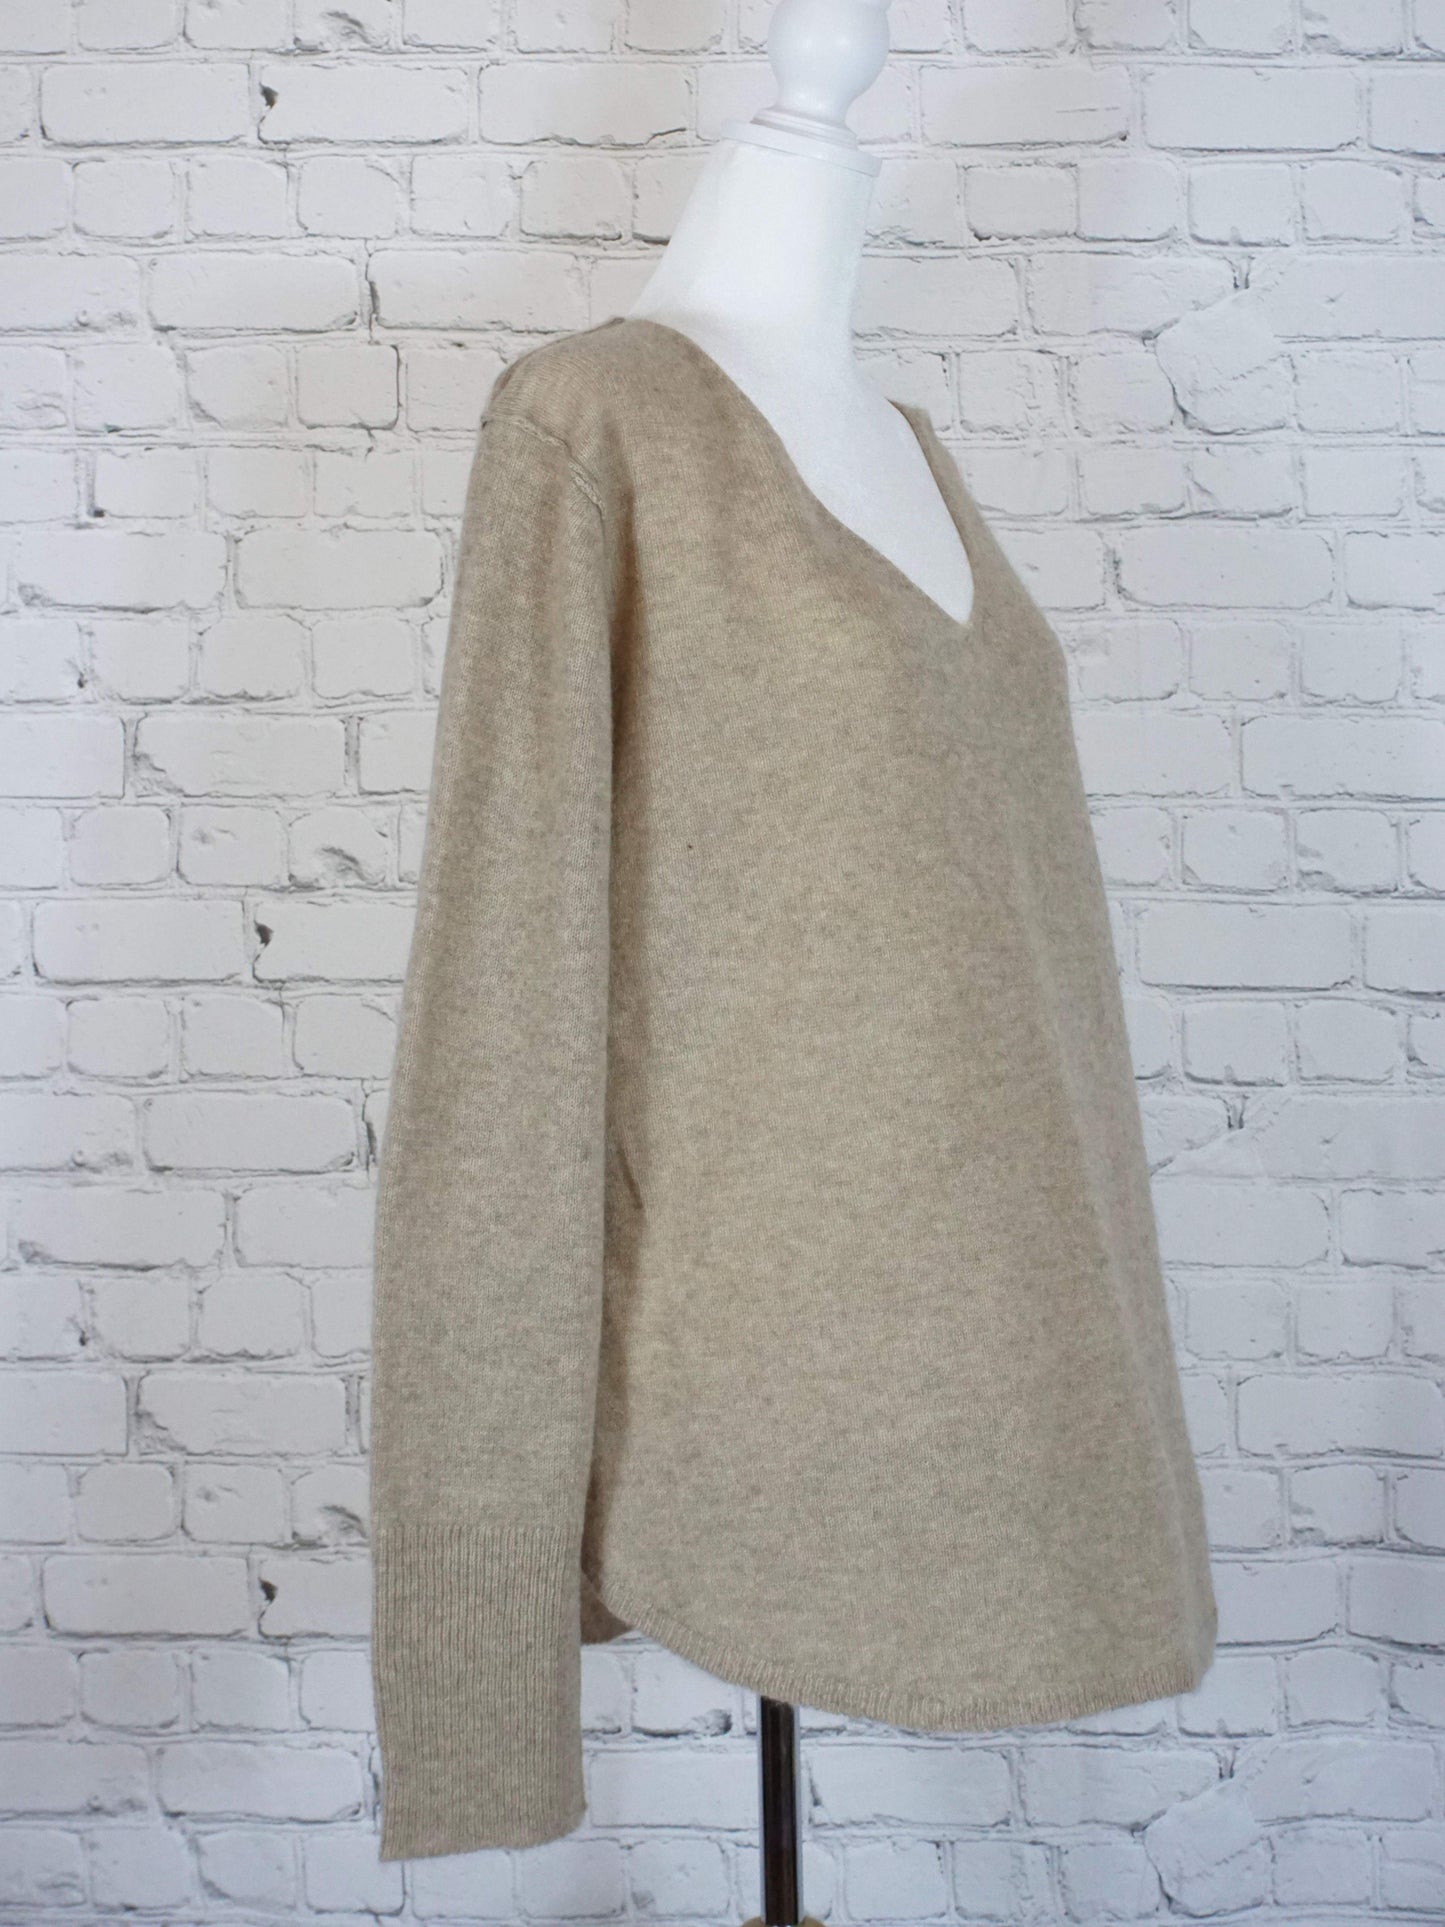 Goode Rider Must Have Cashmere Sweater Size L